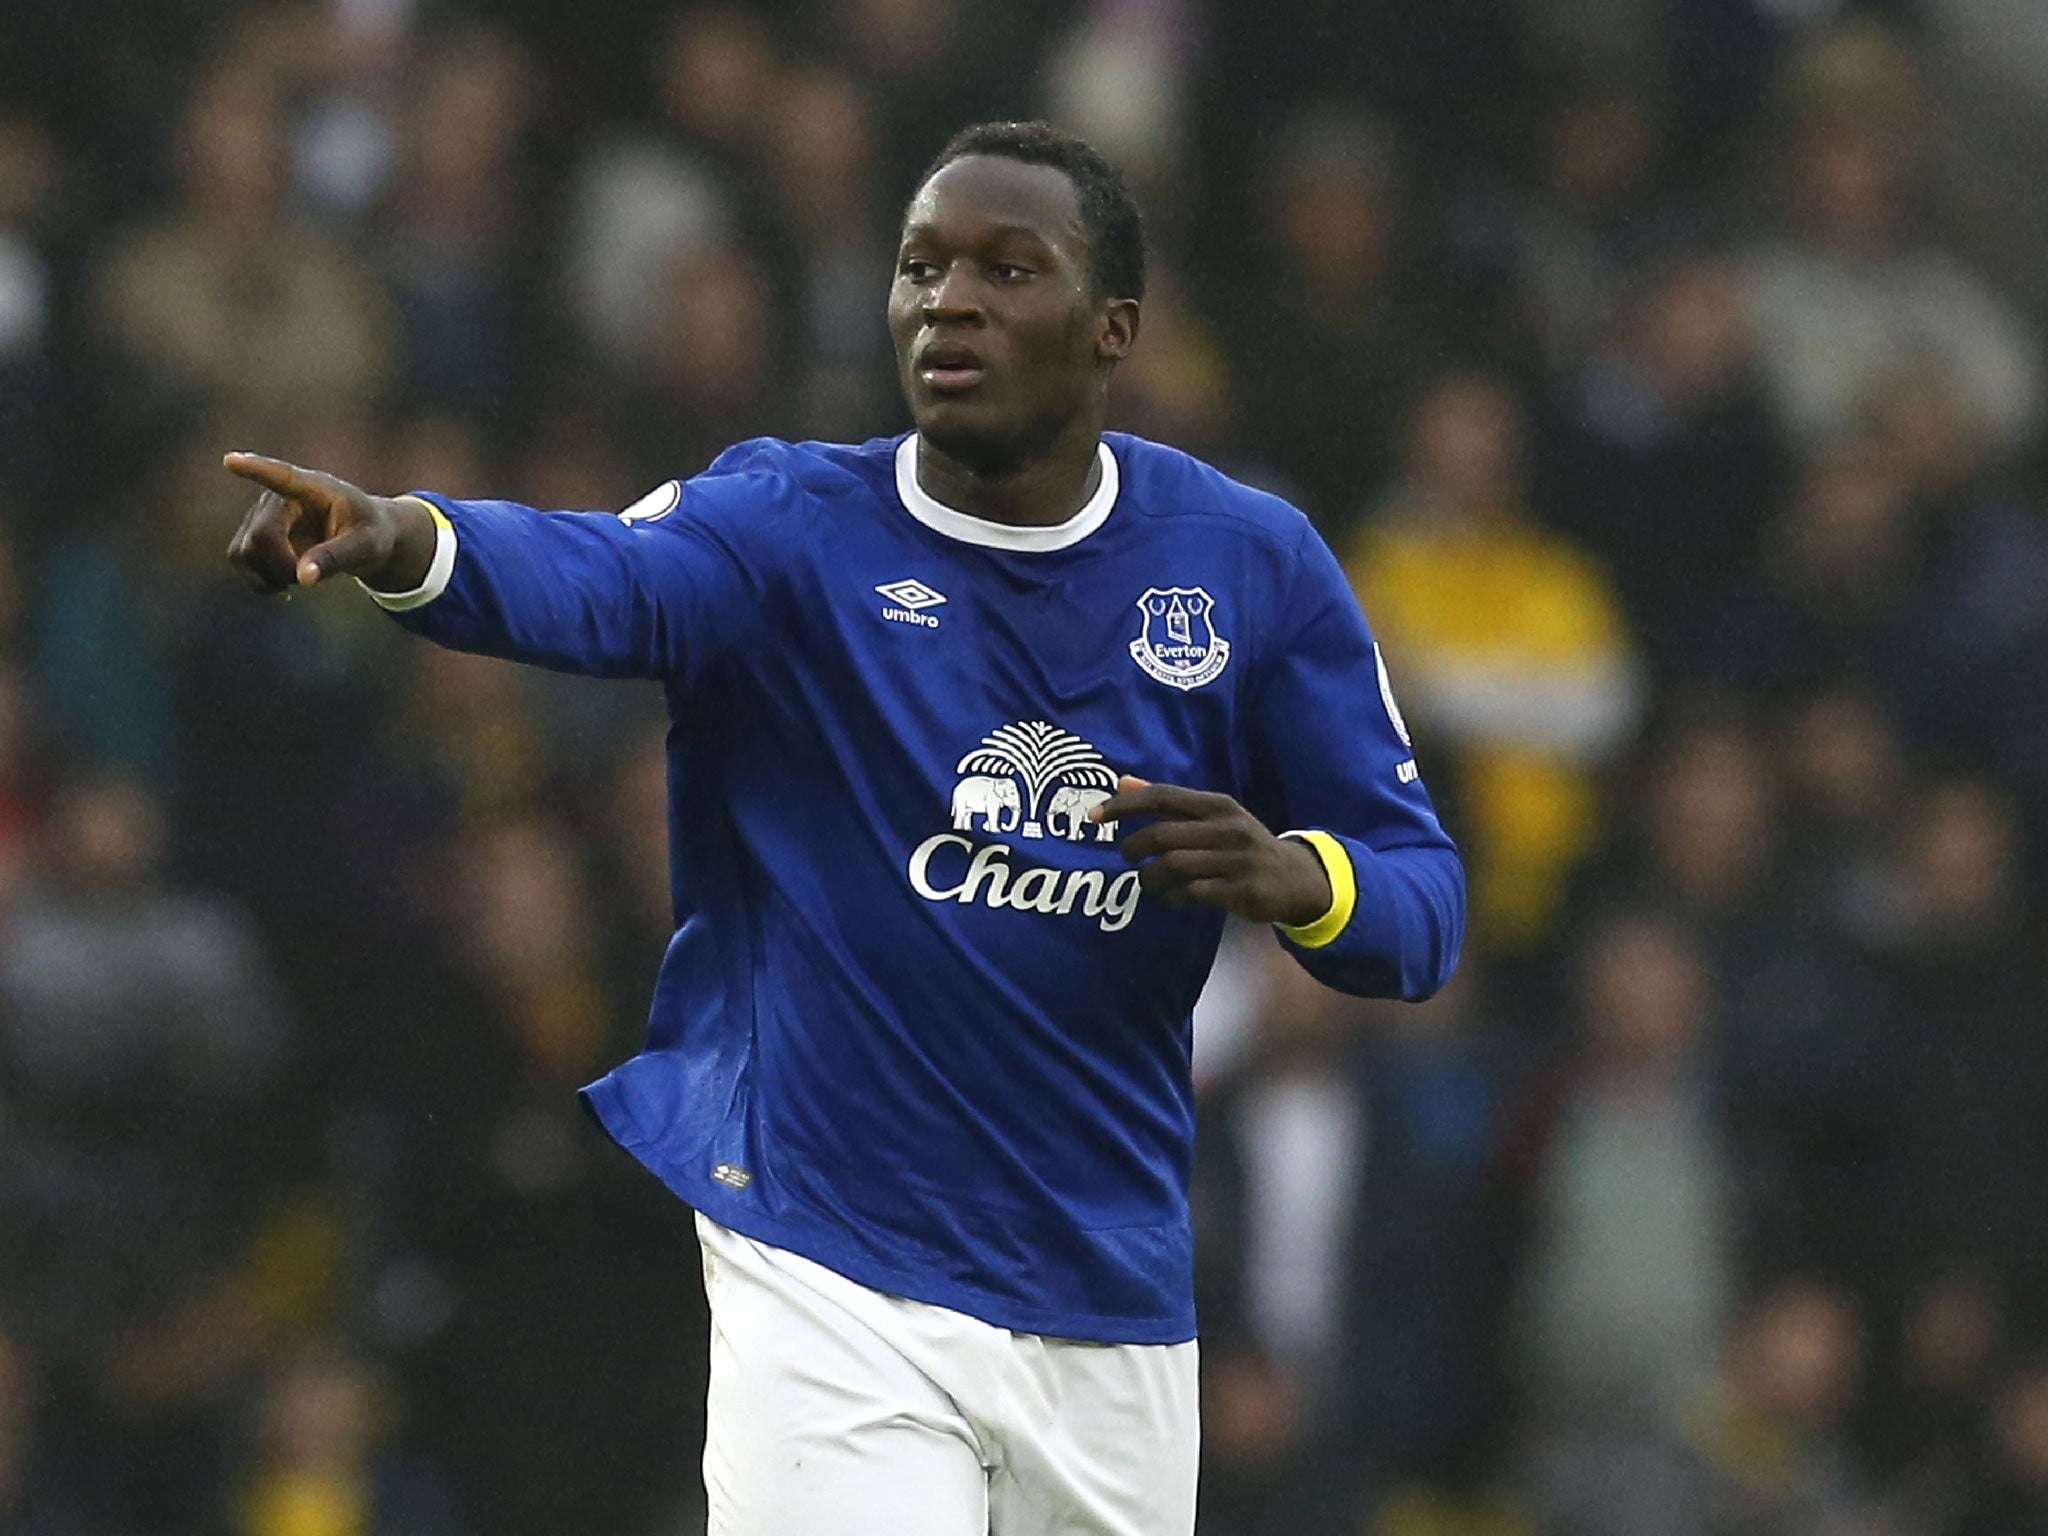 Romelu Lukaku is close to a new contract but that's no guarantee he's staying at Everton, says Ronald Koeman